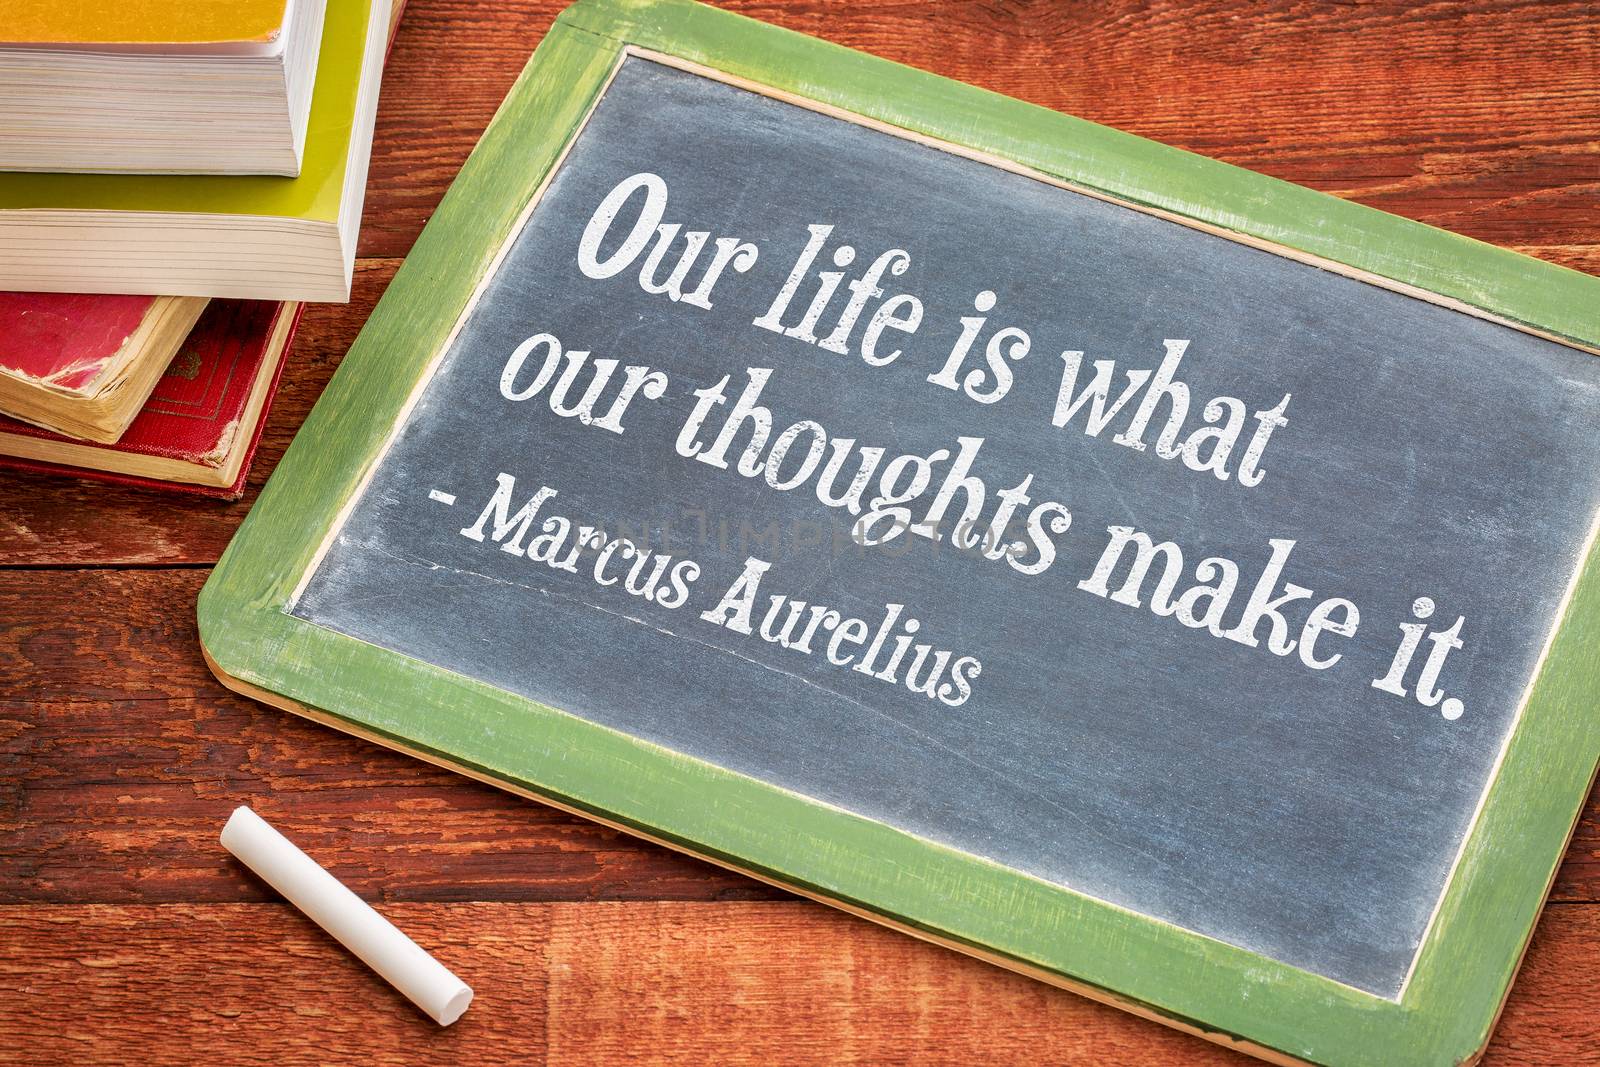 Our life is what our thoughts make it - inspirational word by Marcus Aurelius on a slate blackboard with a white chalk and a stack of books against rustic wooden table